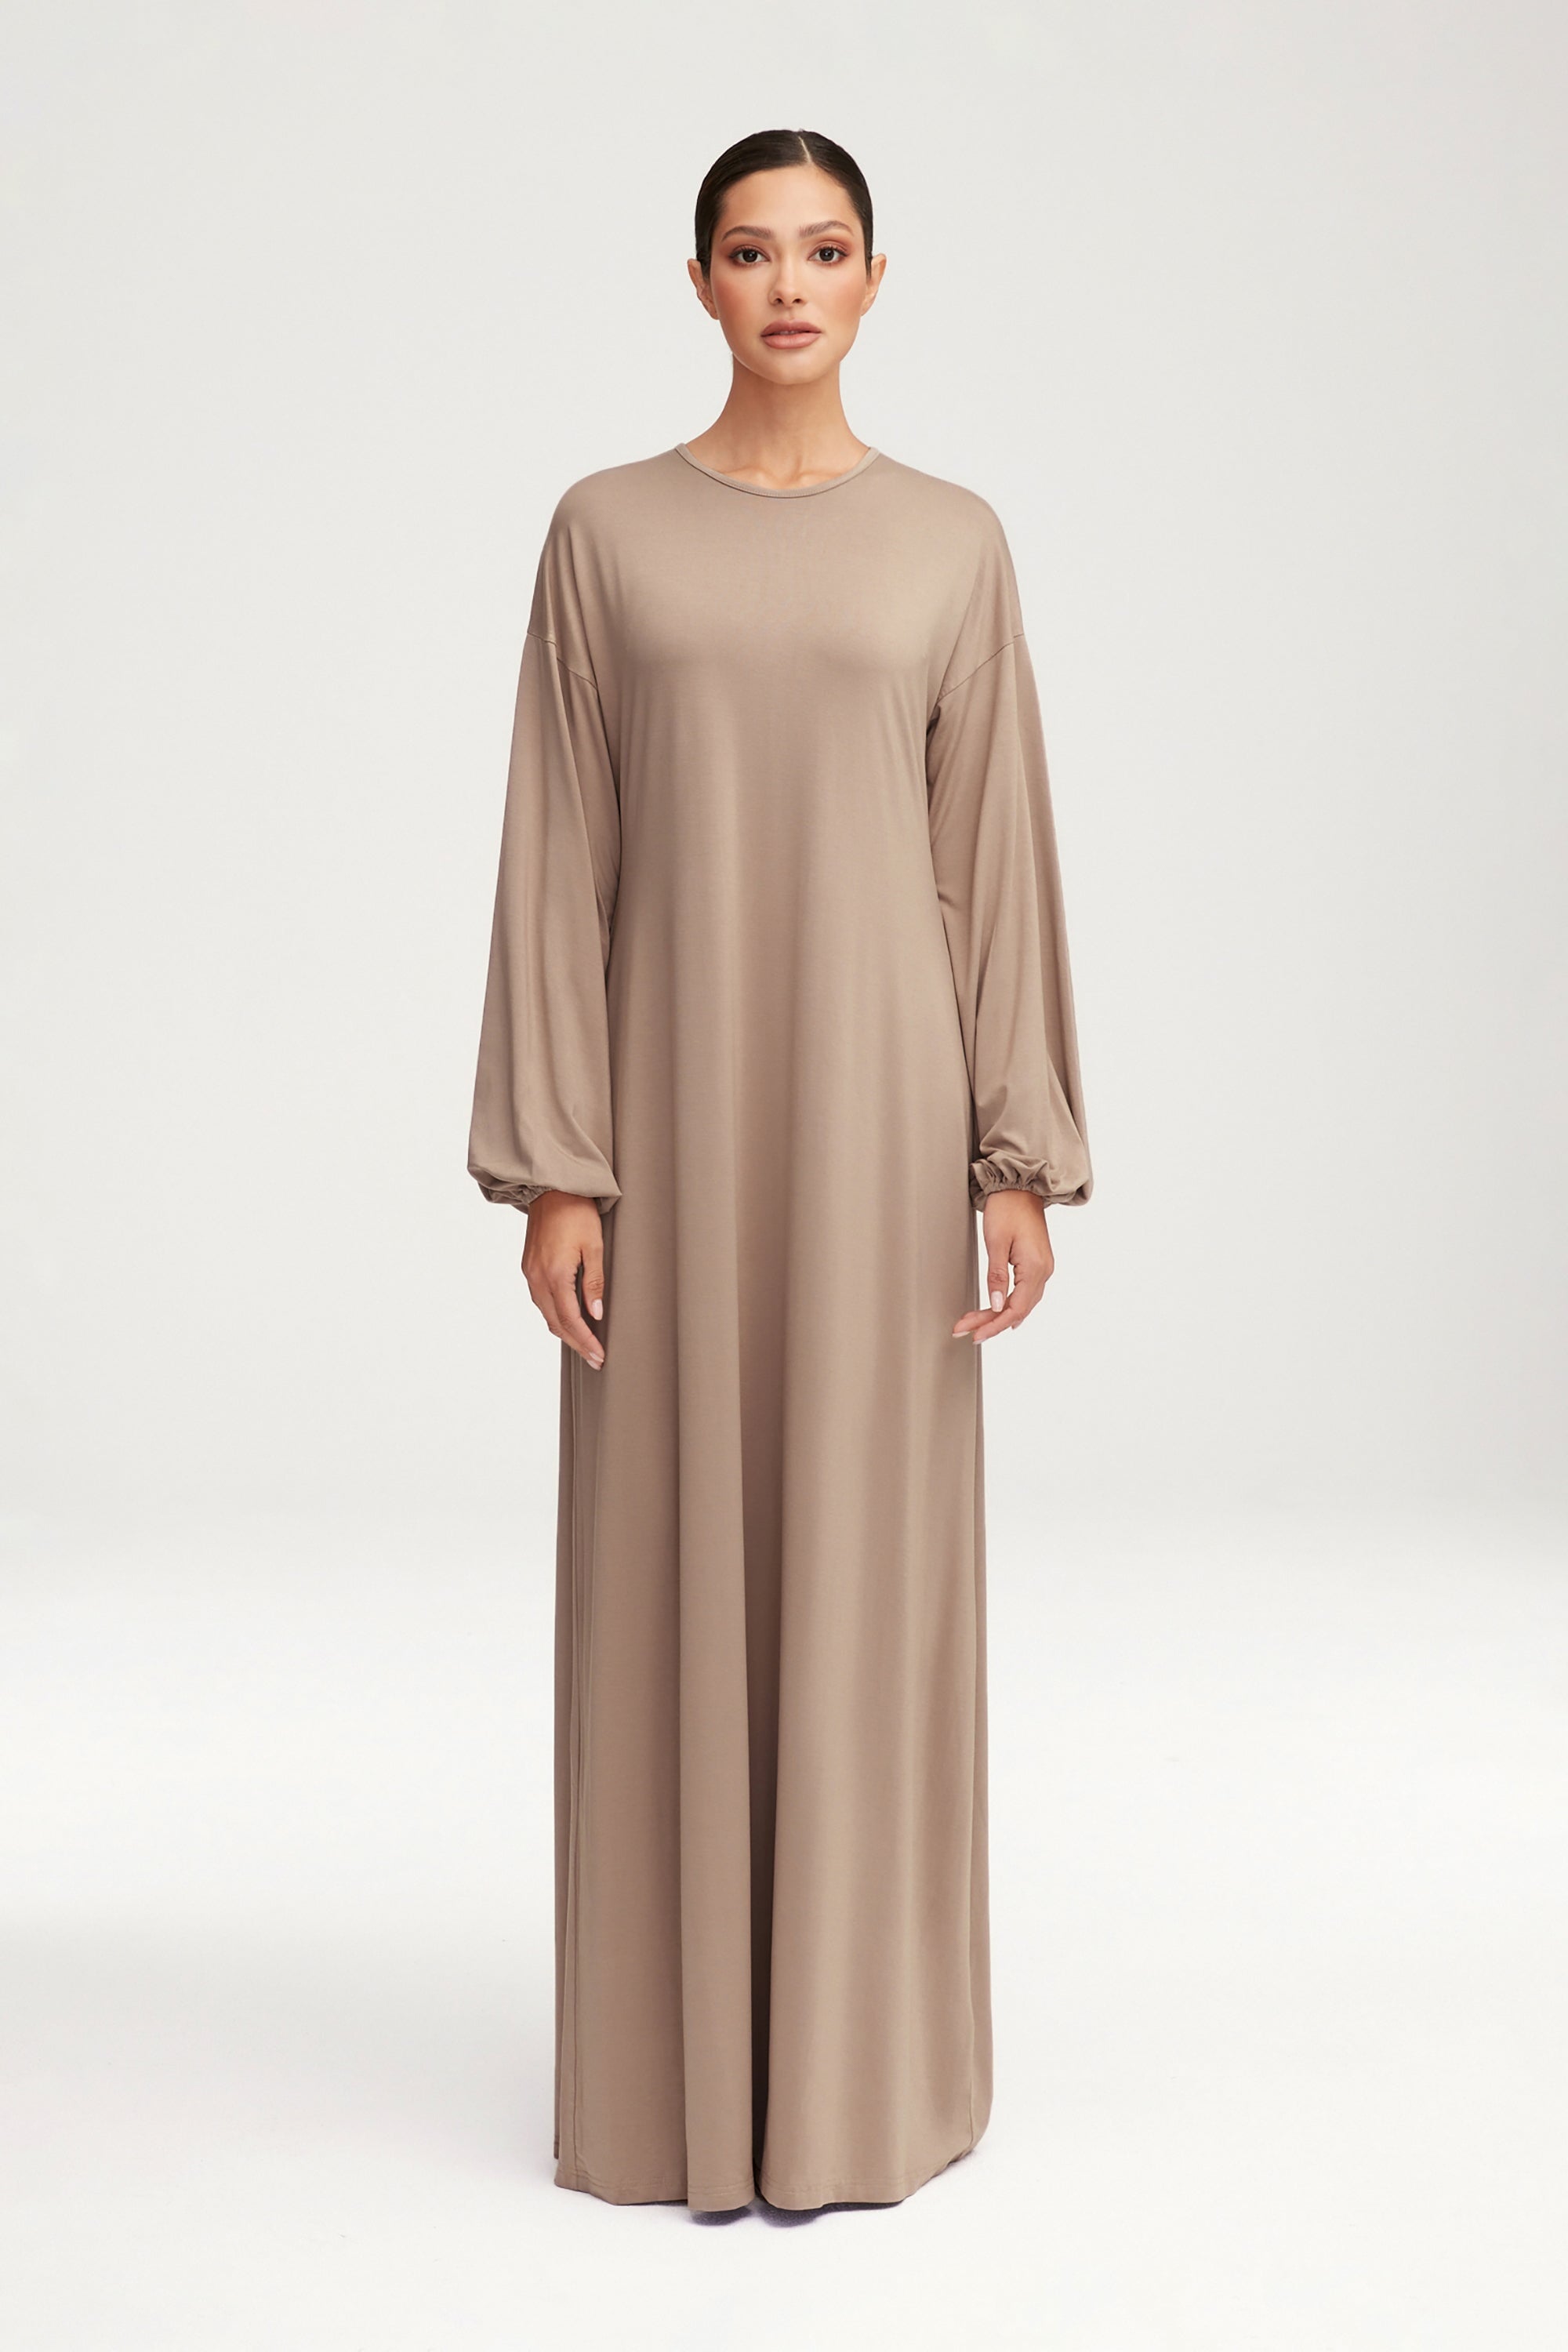 Afiyah Jersey Maxi Dress - Taupe Clothing epschoolboard 